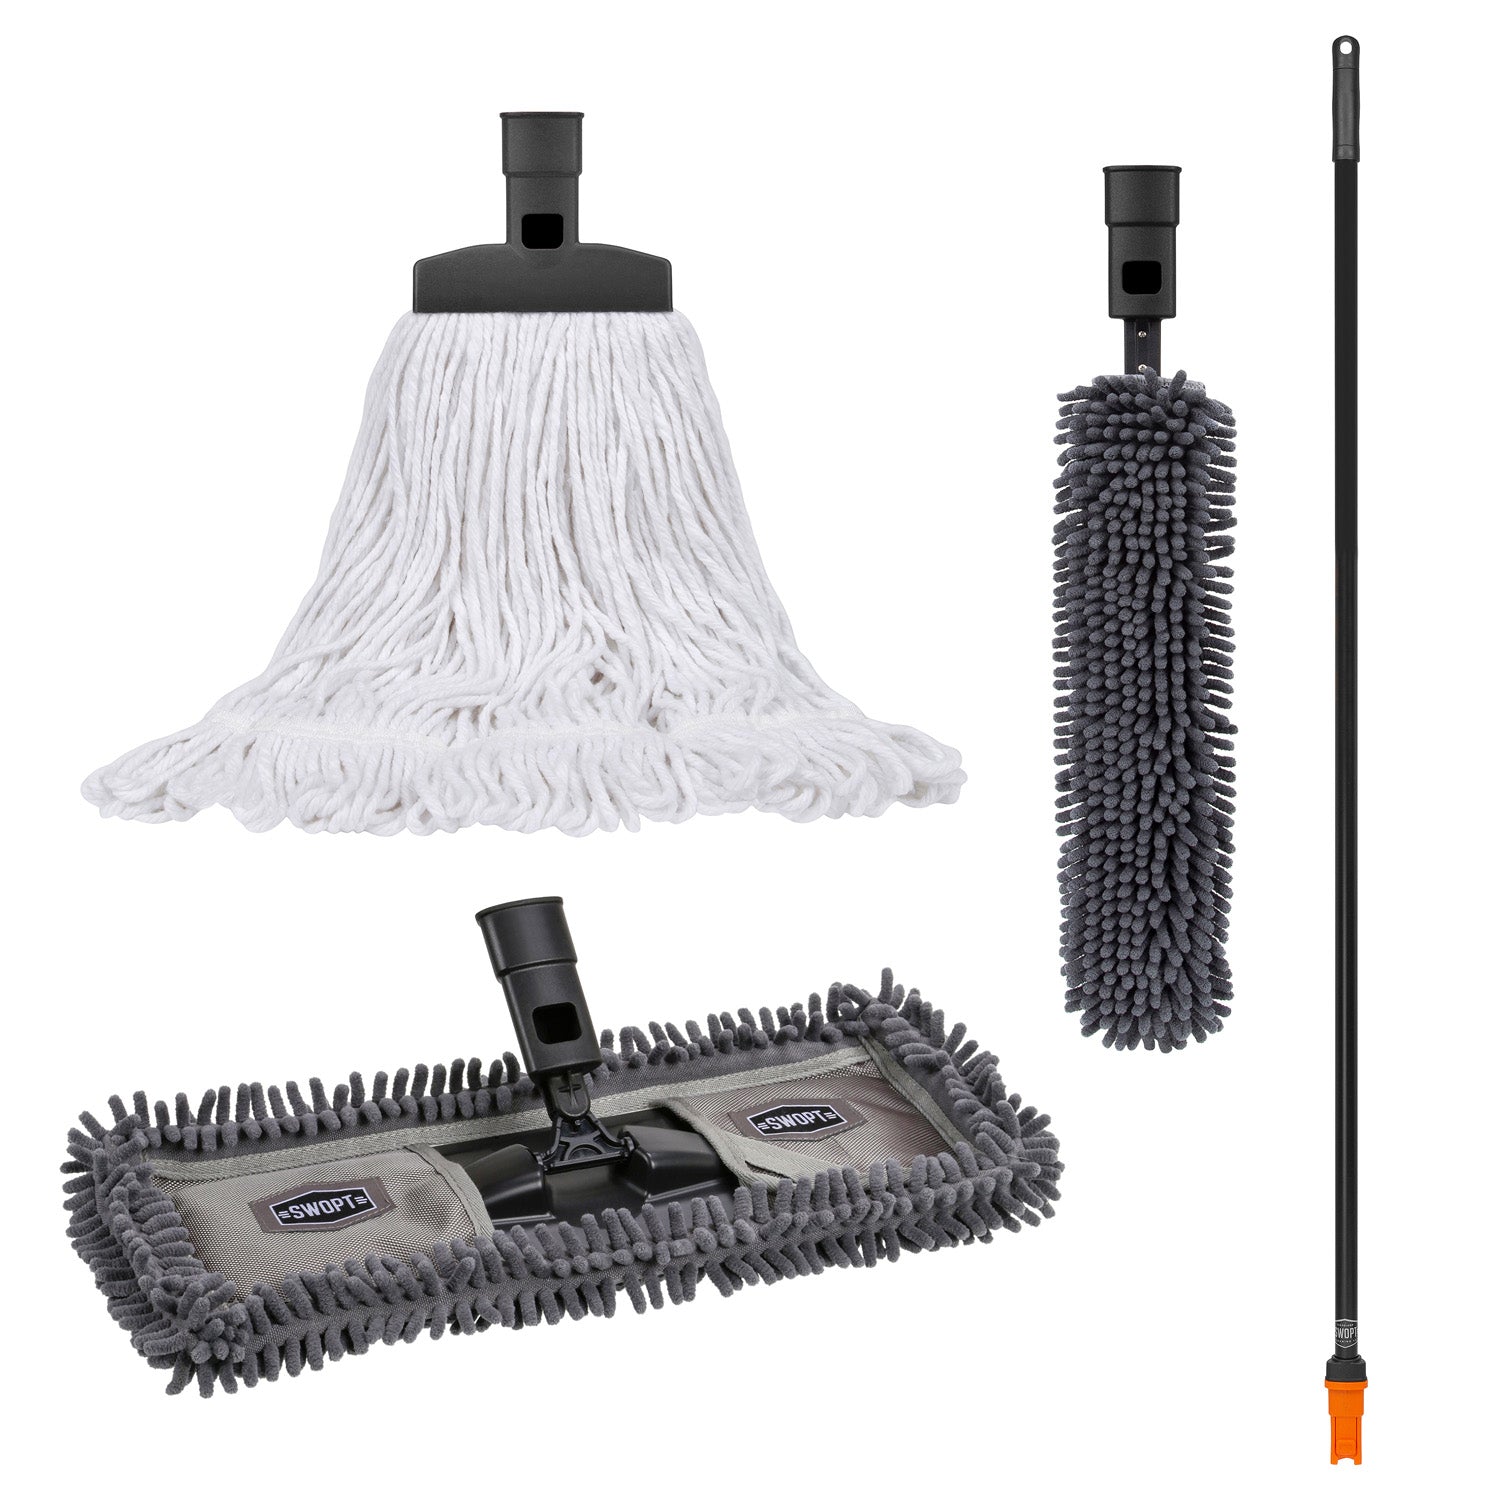 Dust Mop Head, Duster Head, and Cotton Mop Head Bundle with Handle